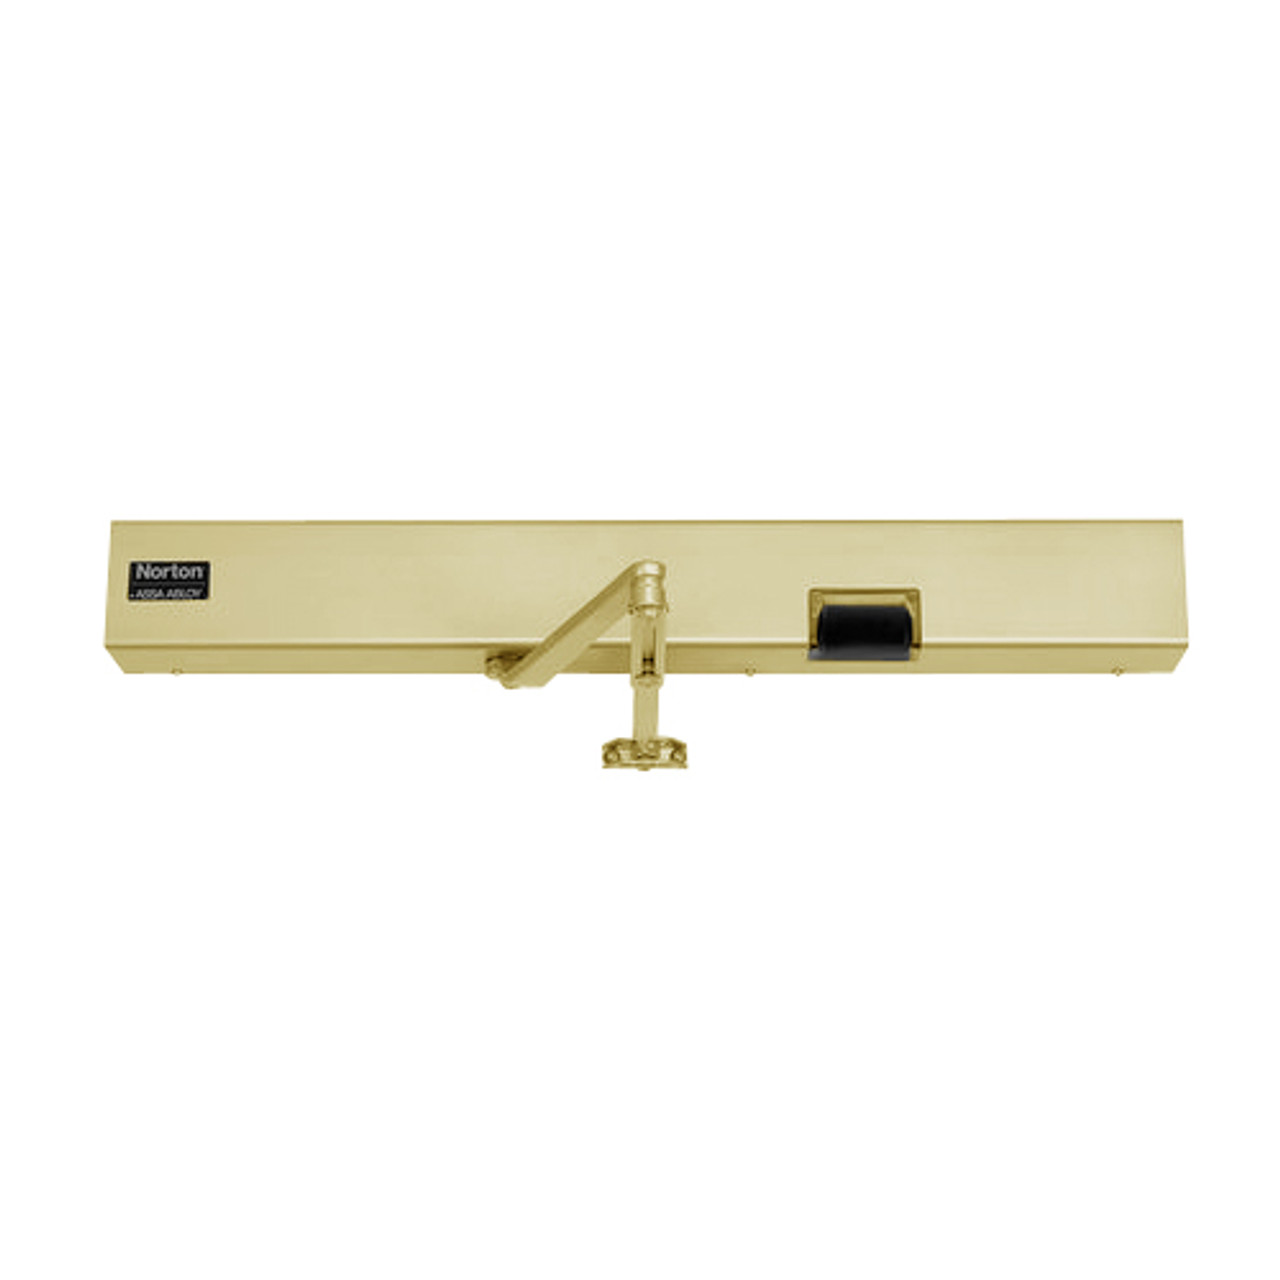 7134SZ-LH-120VAC-696 Norton 7100SZ Series Safe Zone Multi-Point Closer/Holder with Motion Sensor and Push Side Double Lever 13-1/2 inch Main Arm in Gold Finish